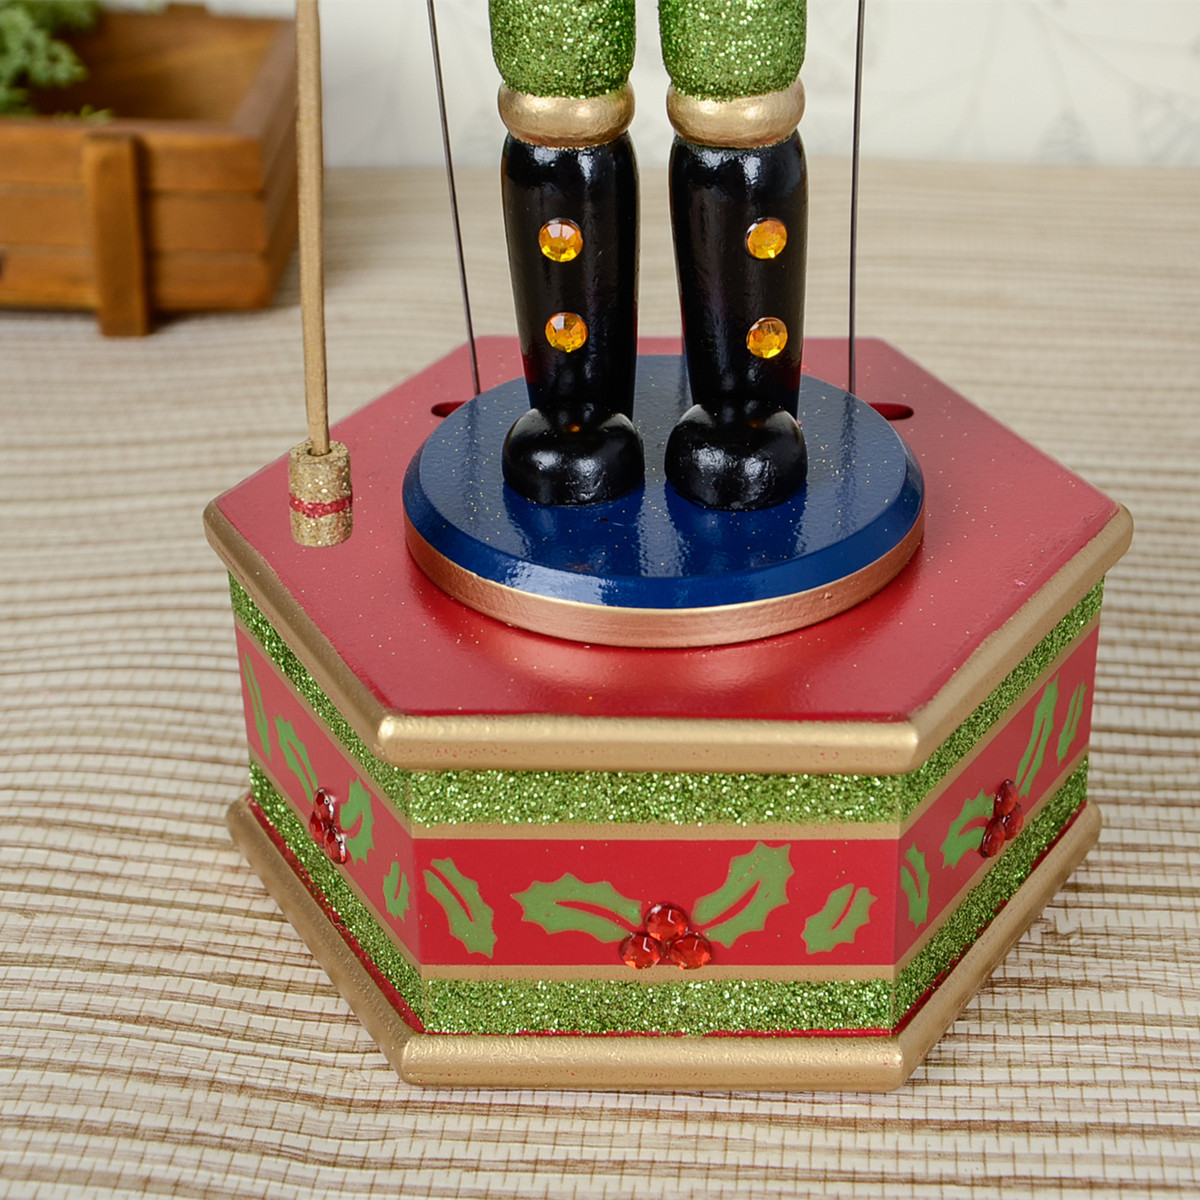 32cm-Wooden-Music-Box-Nutcracker-Doll-Soldier-Vintage-Handcraft-Decoration-Christmas-Gifts-1398446-6